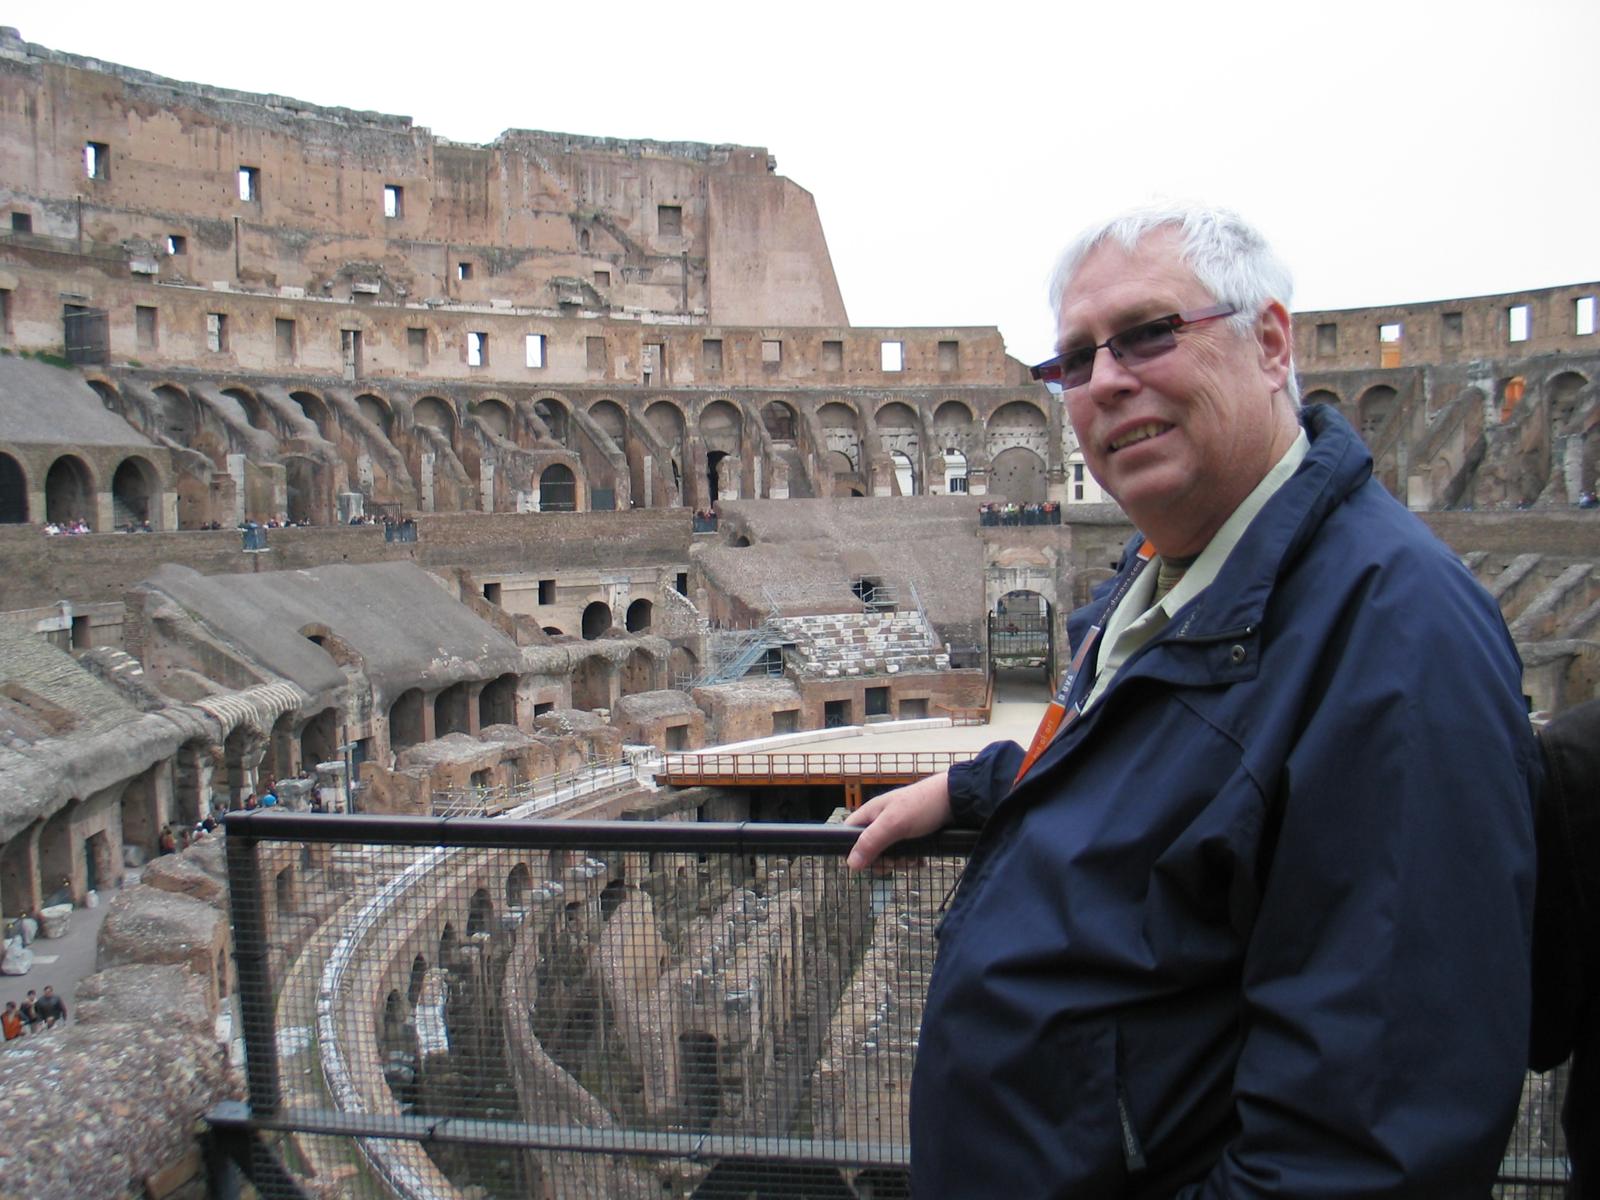 Dad at the Coliseum